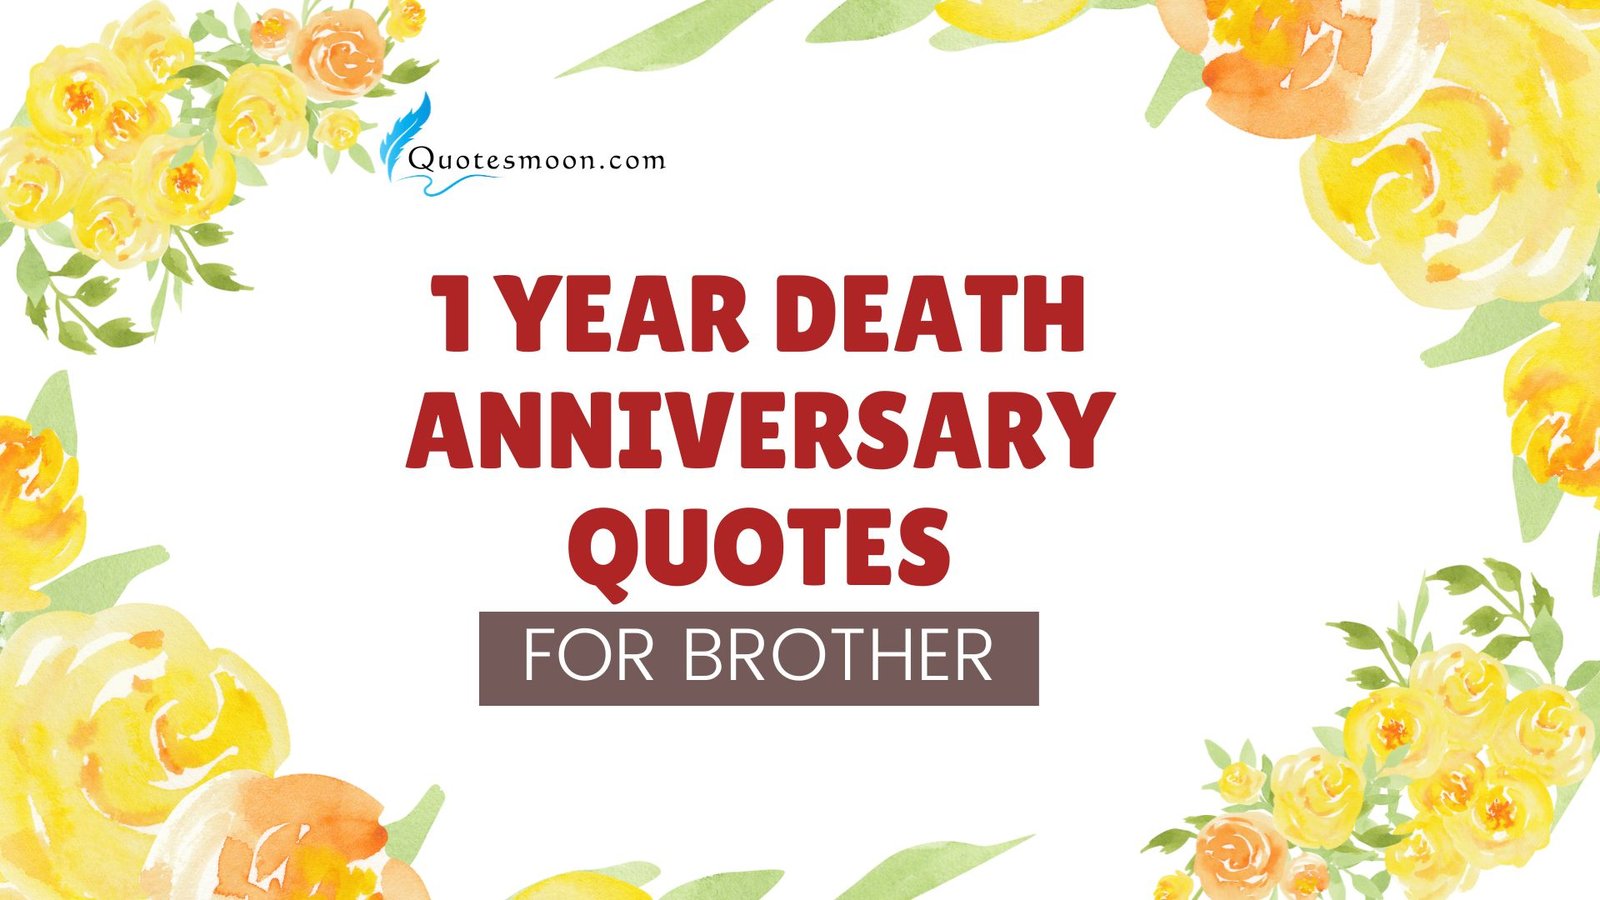 1 year death anniversary quotes for brother